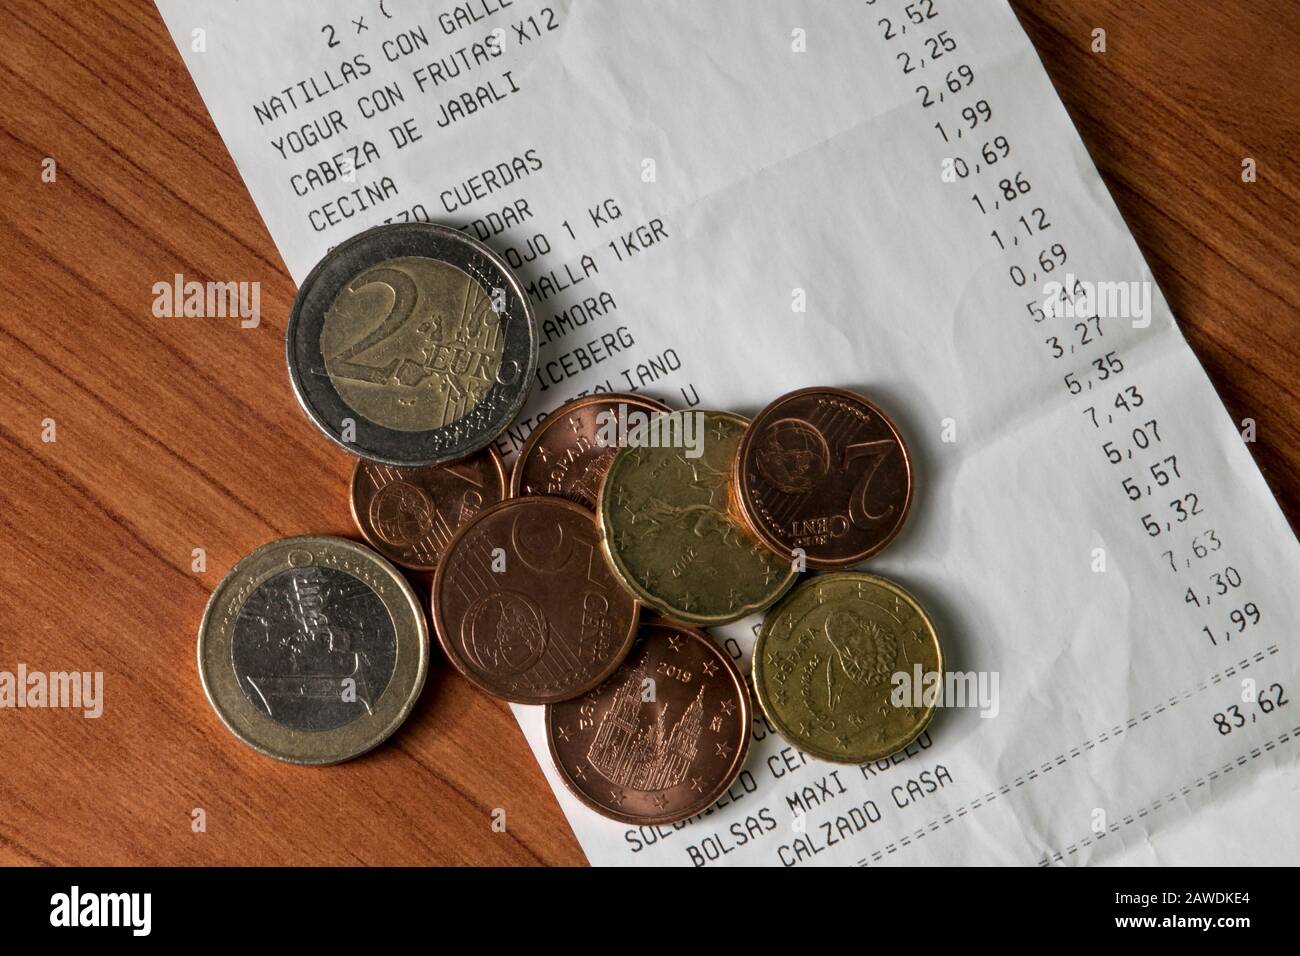 Coins with purchase ticket and products and prices Stock Photo